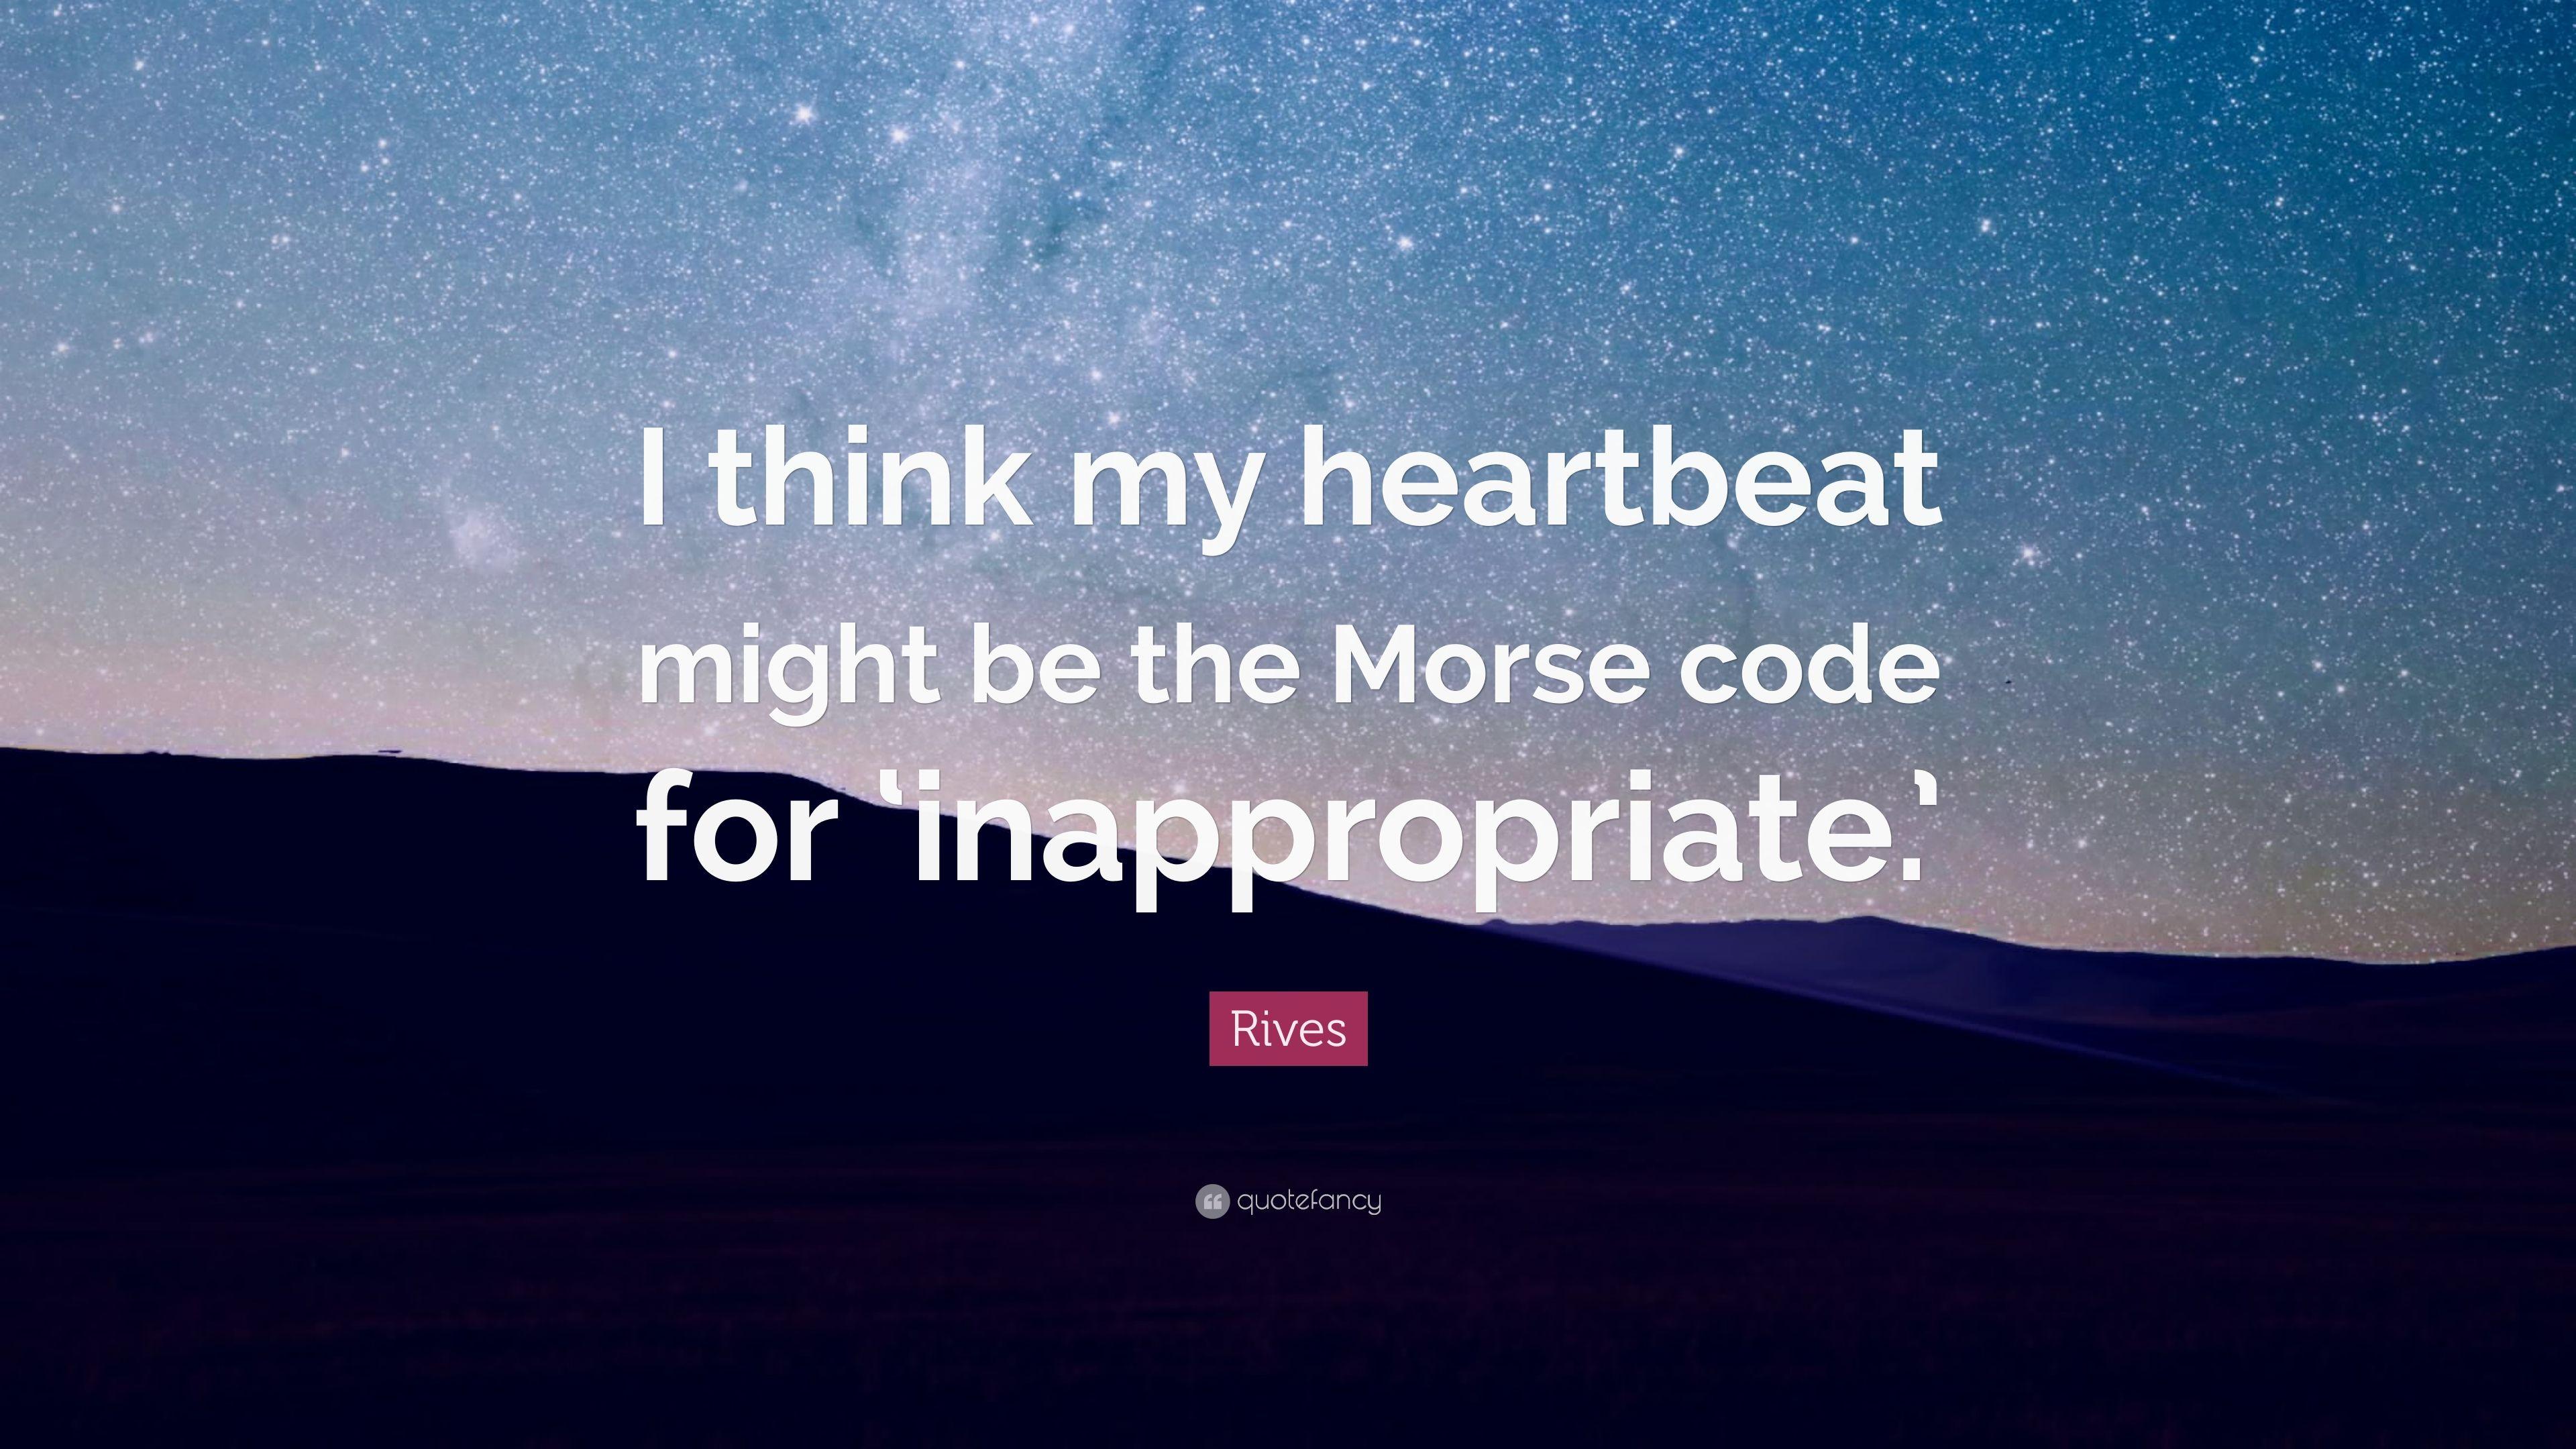 Rives Quote: “I think my heartbeat might be the Morse code